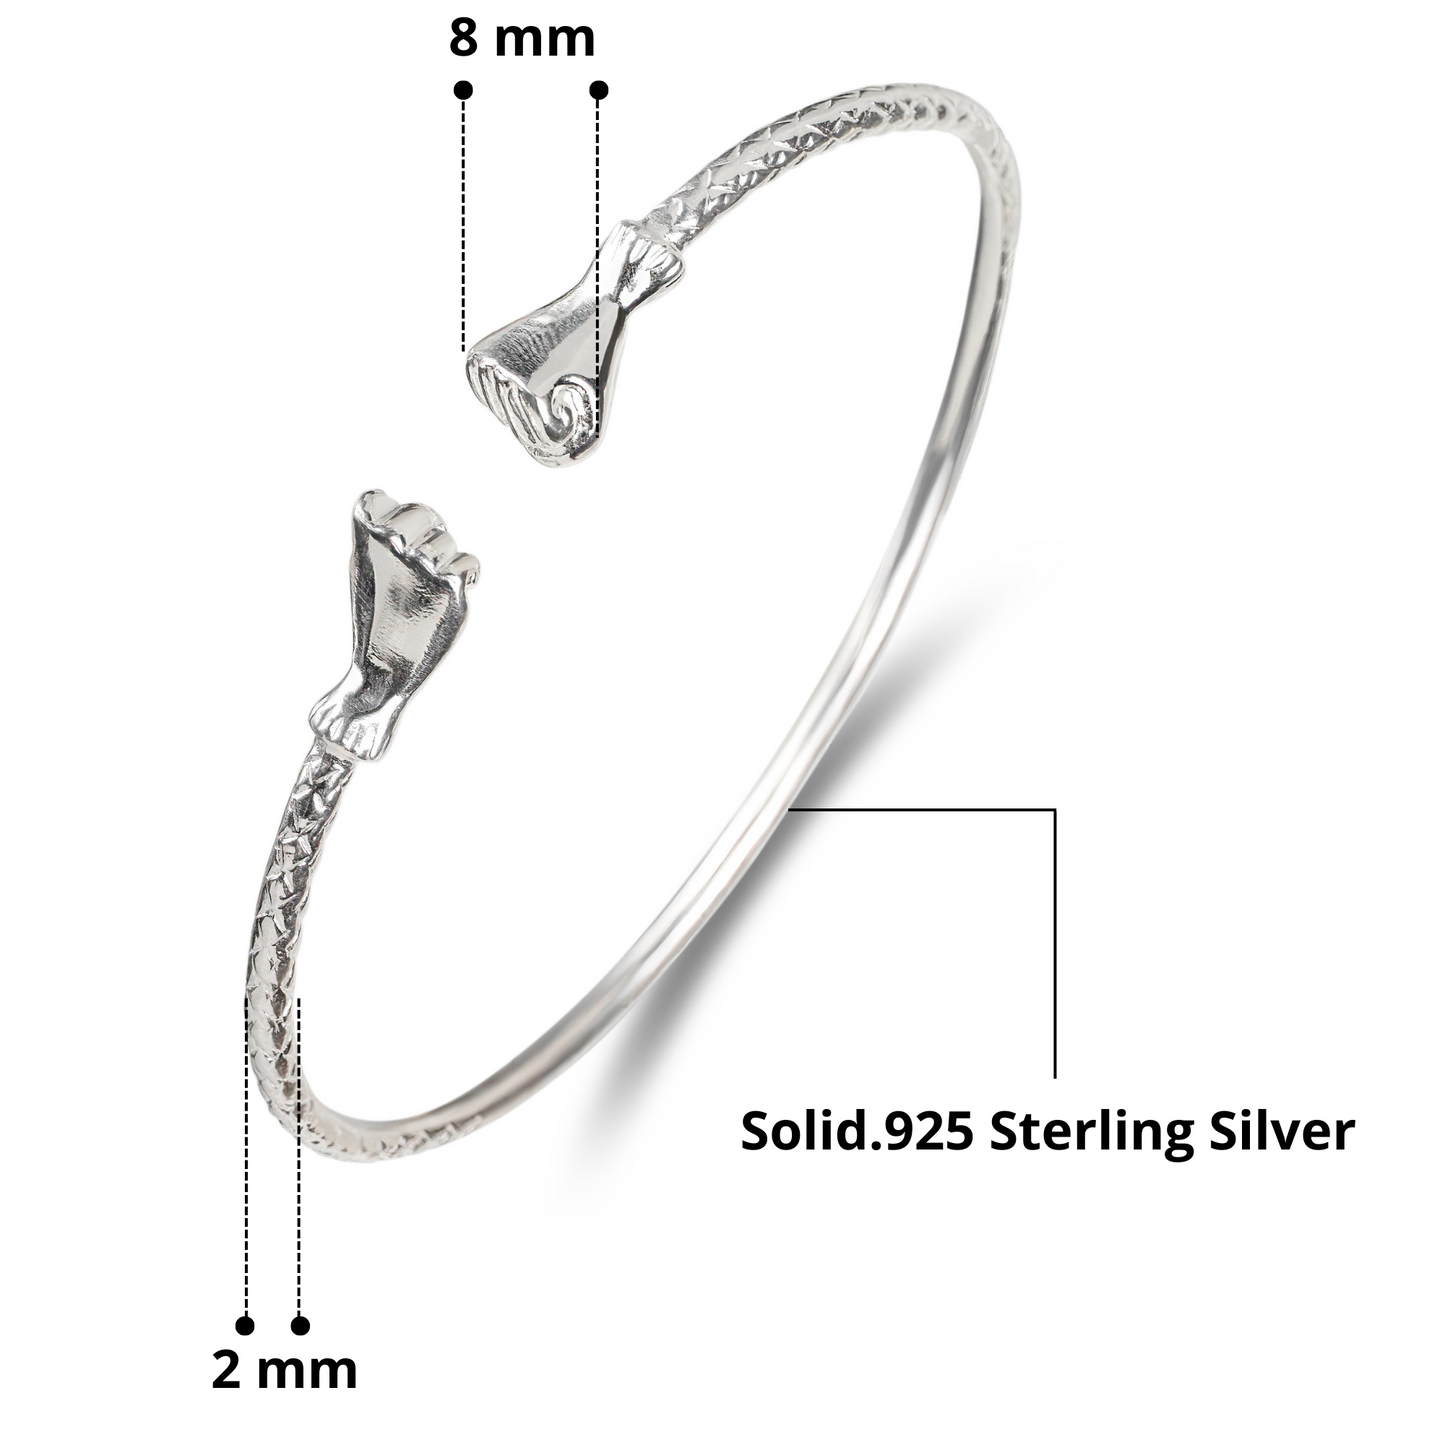 Better Jewelry Fist .925 Sterling Silver West Indian Bangle (1-Piece) (Made in USA)